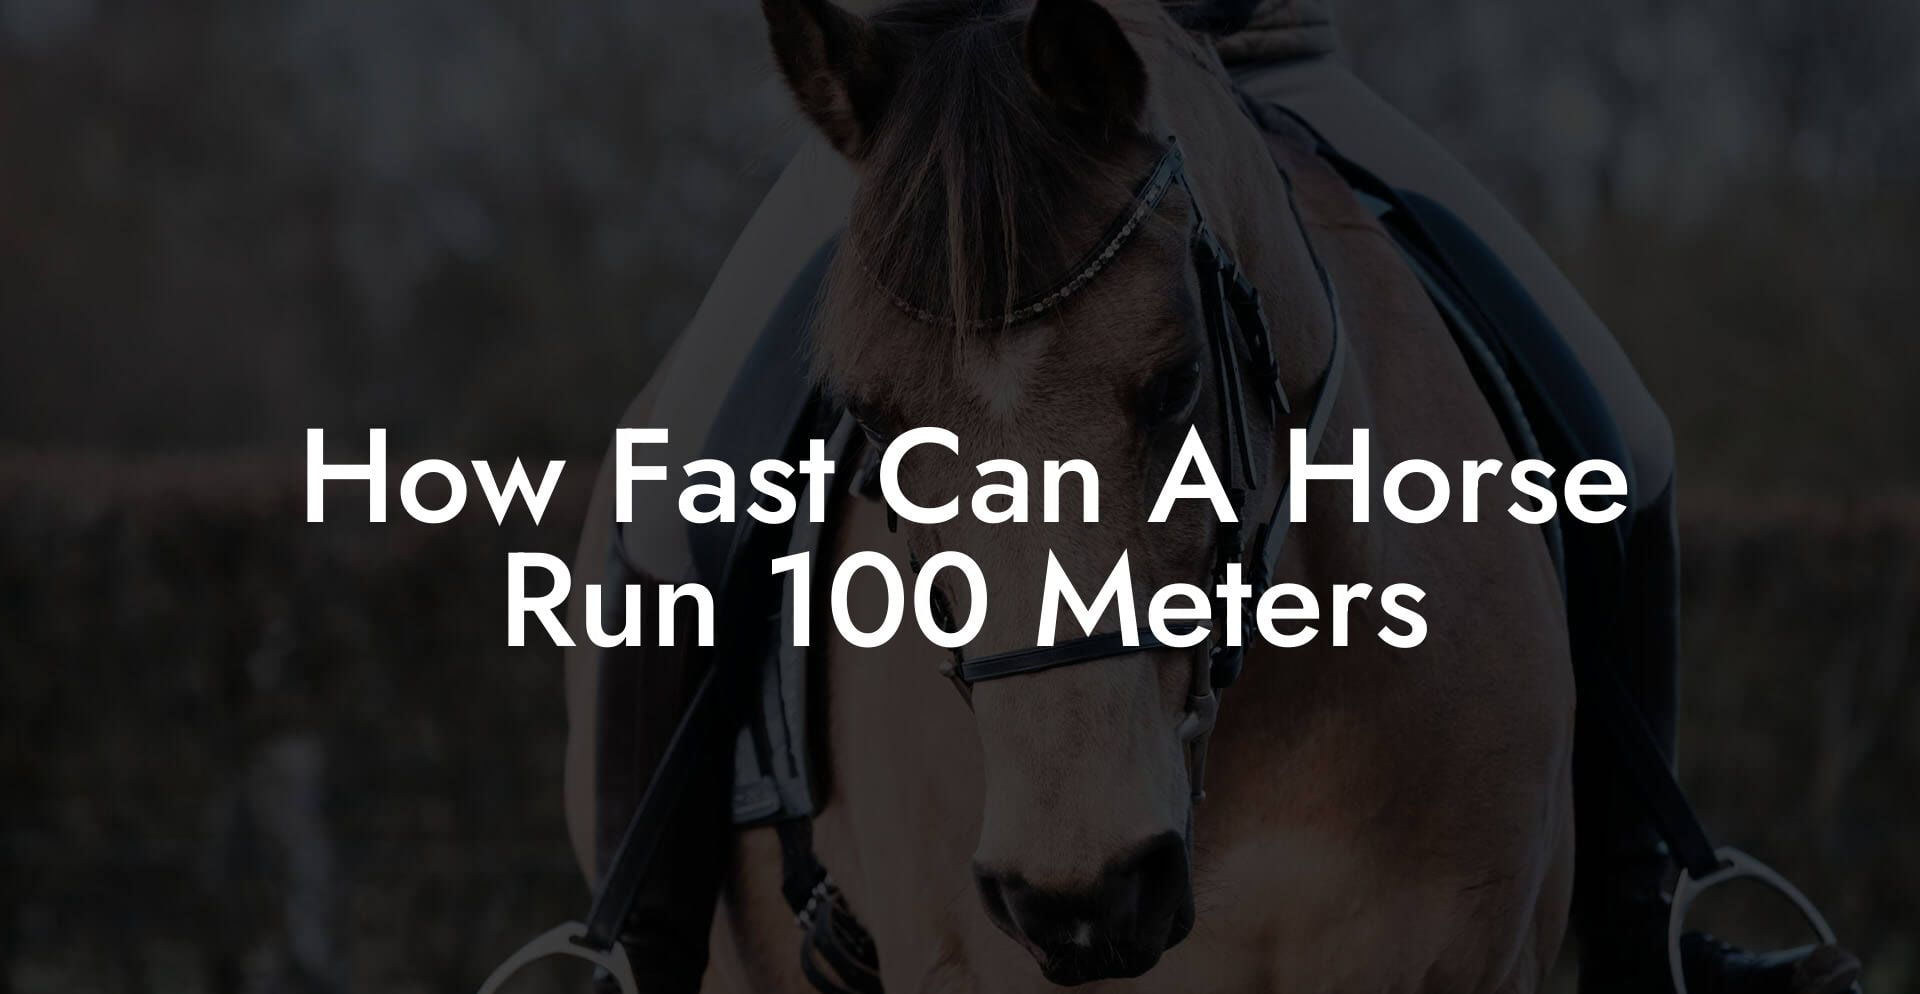 How Fast Can A Horse Run 100 Meters